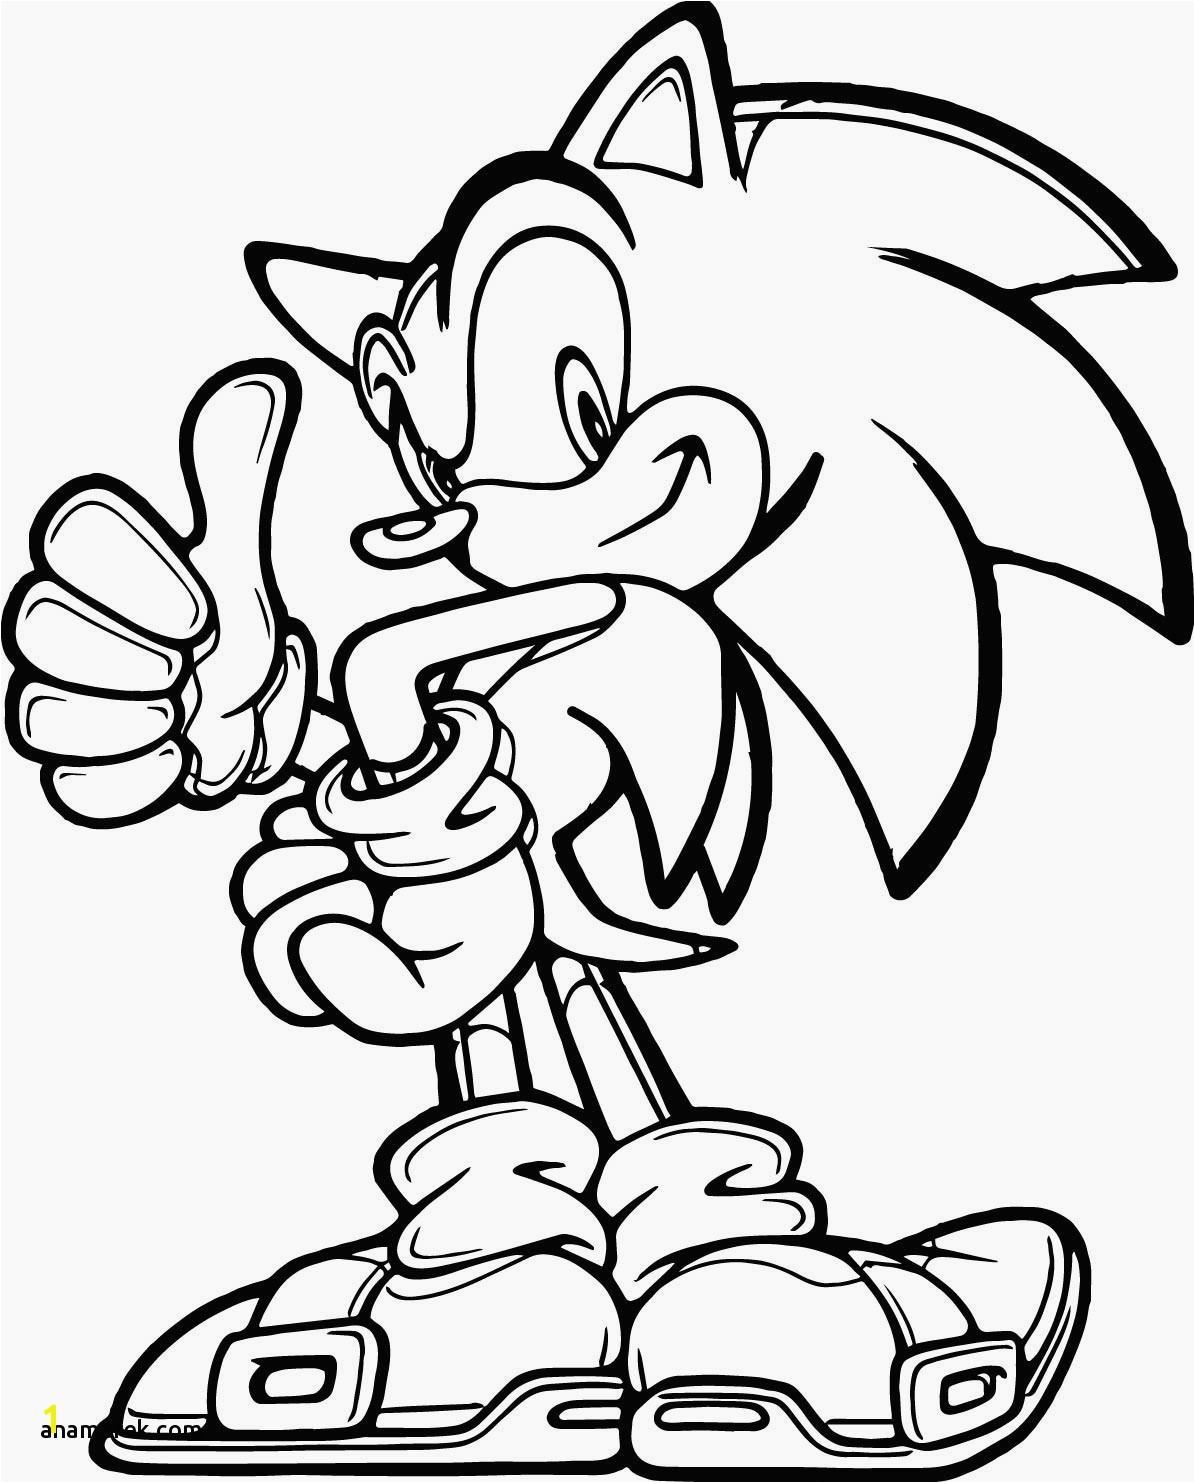 O D Colouring Pages Colouring Pages Sonic The Hedgehog Coloring Book Beautiful Baby Disney Princess Coloring Pages